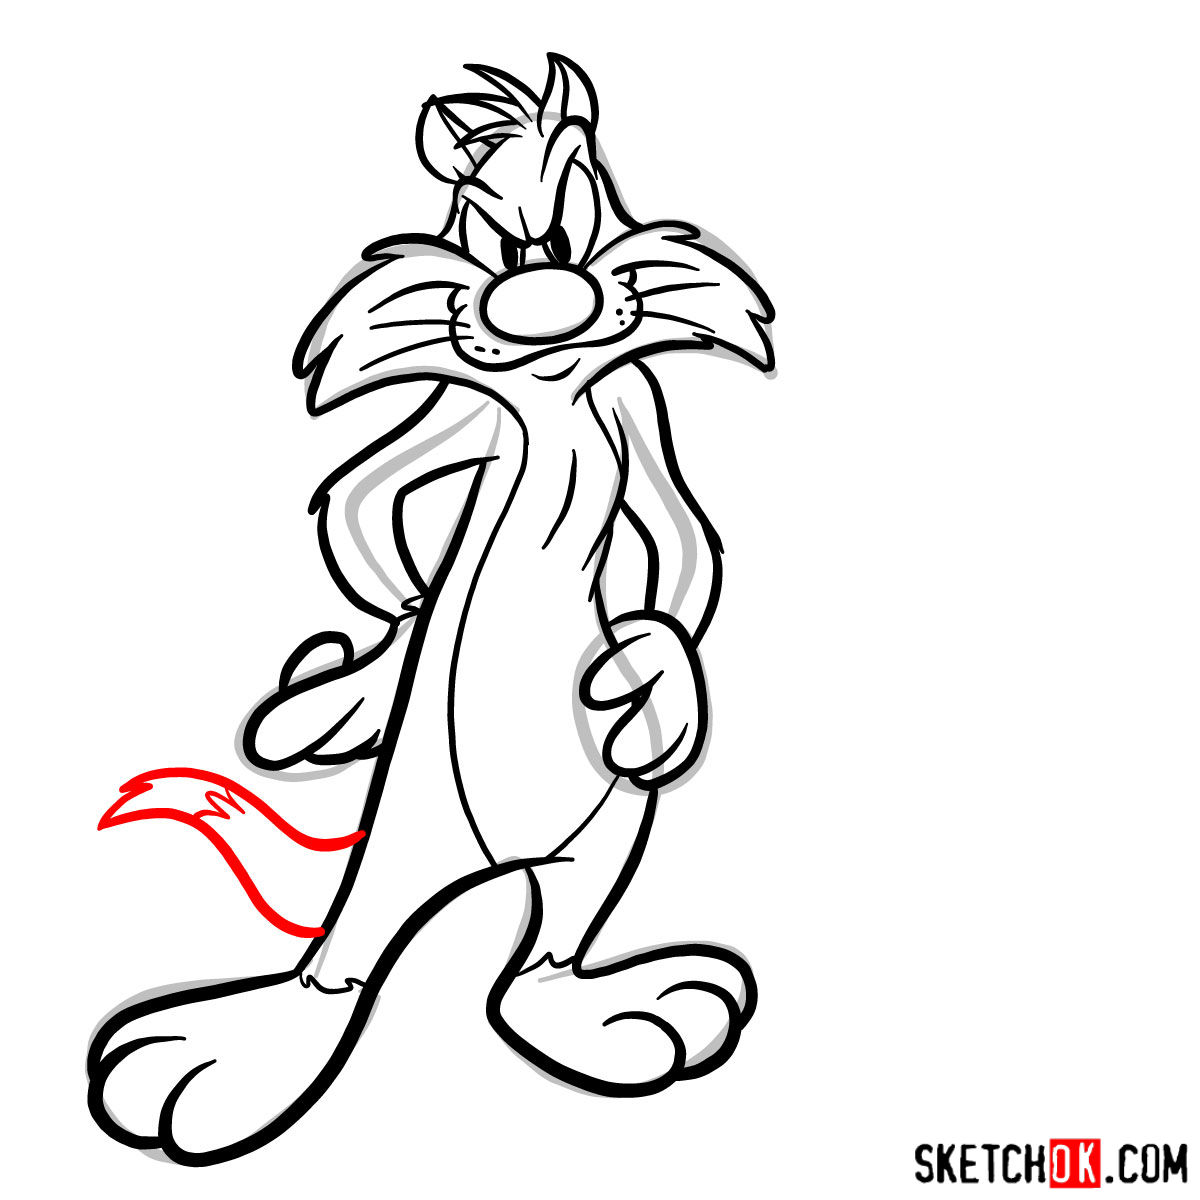 How to draw Sylvester and Tweety - step 11